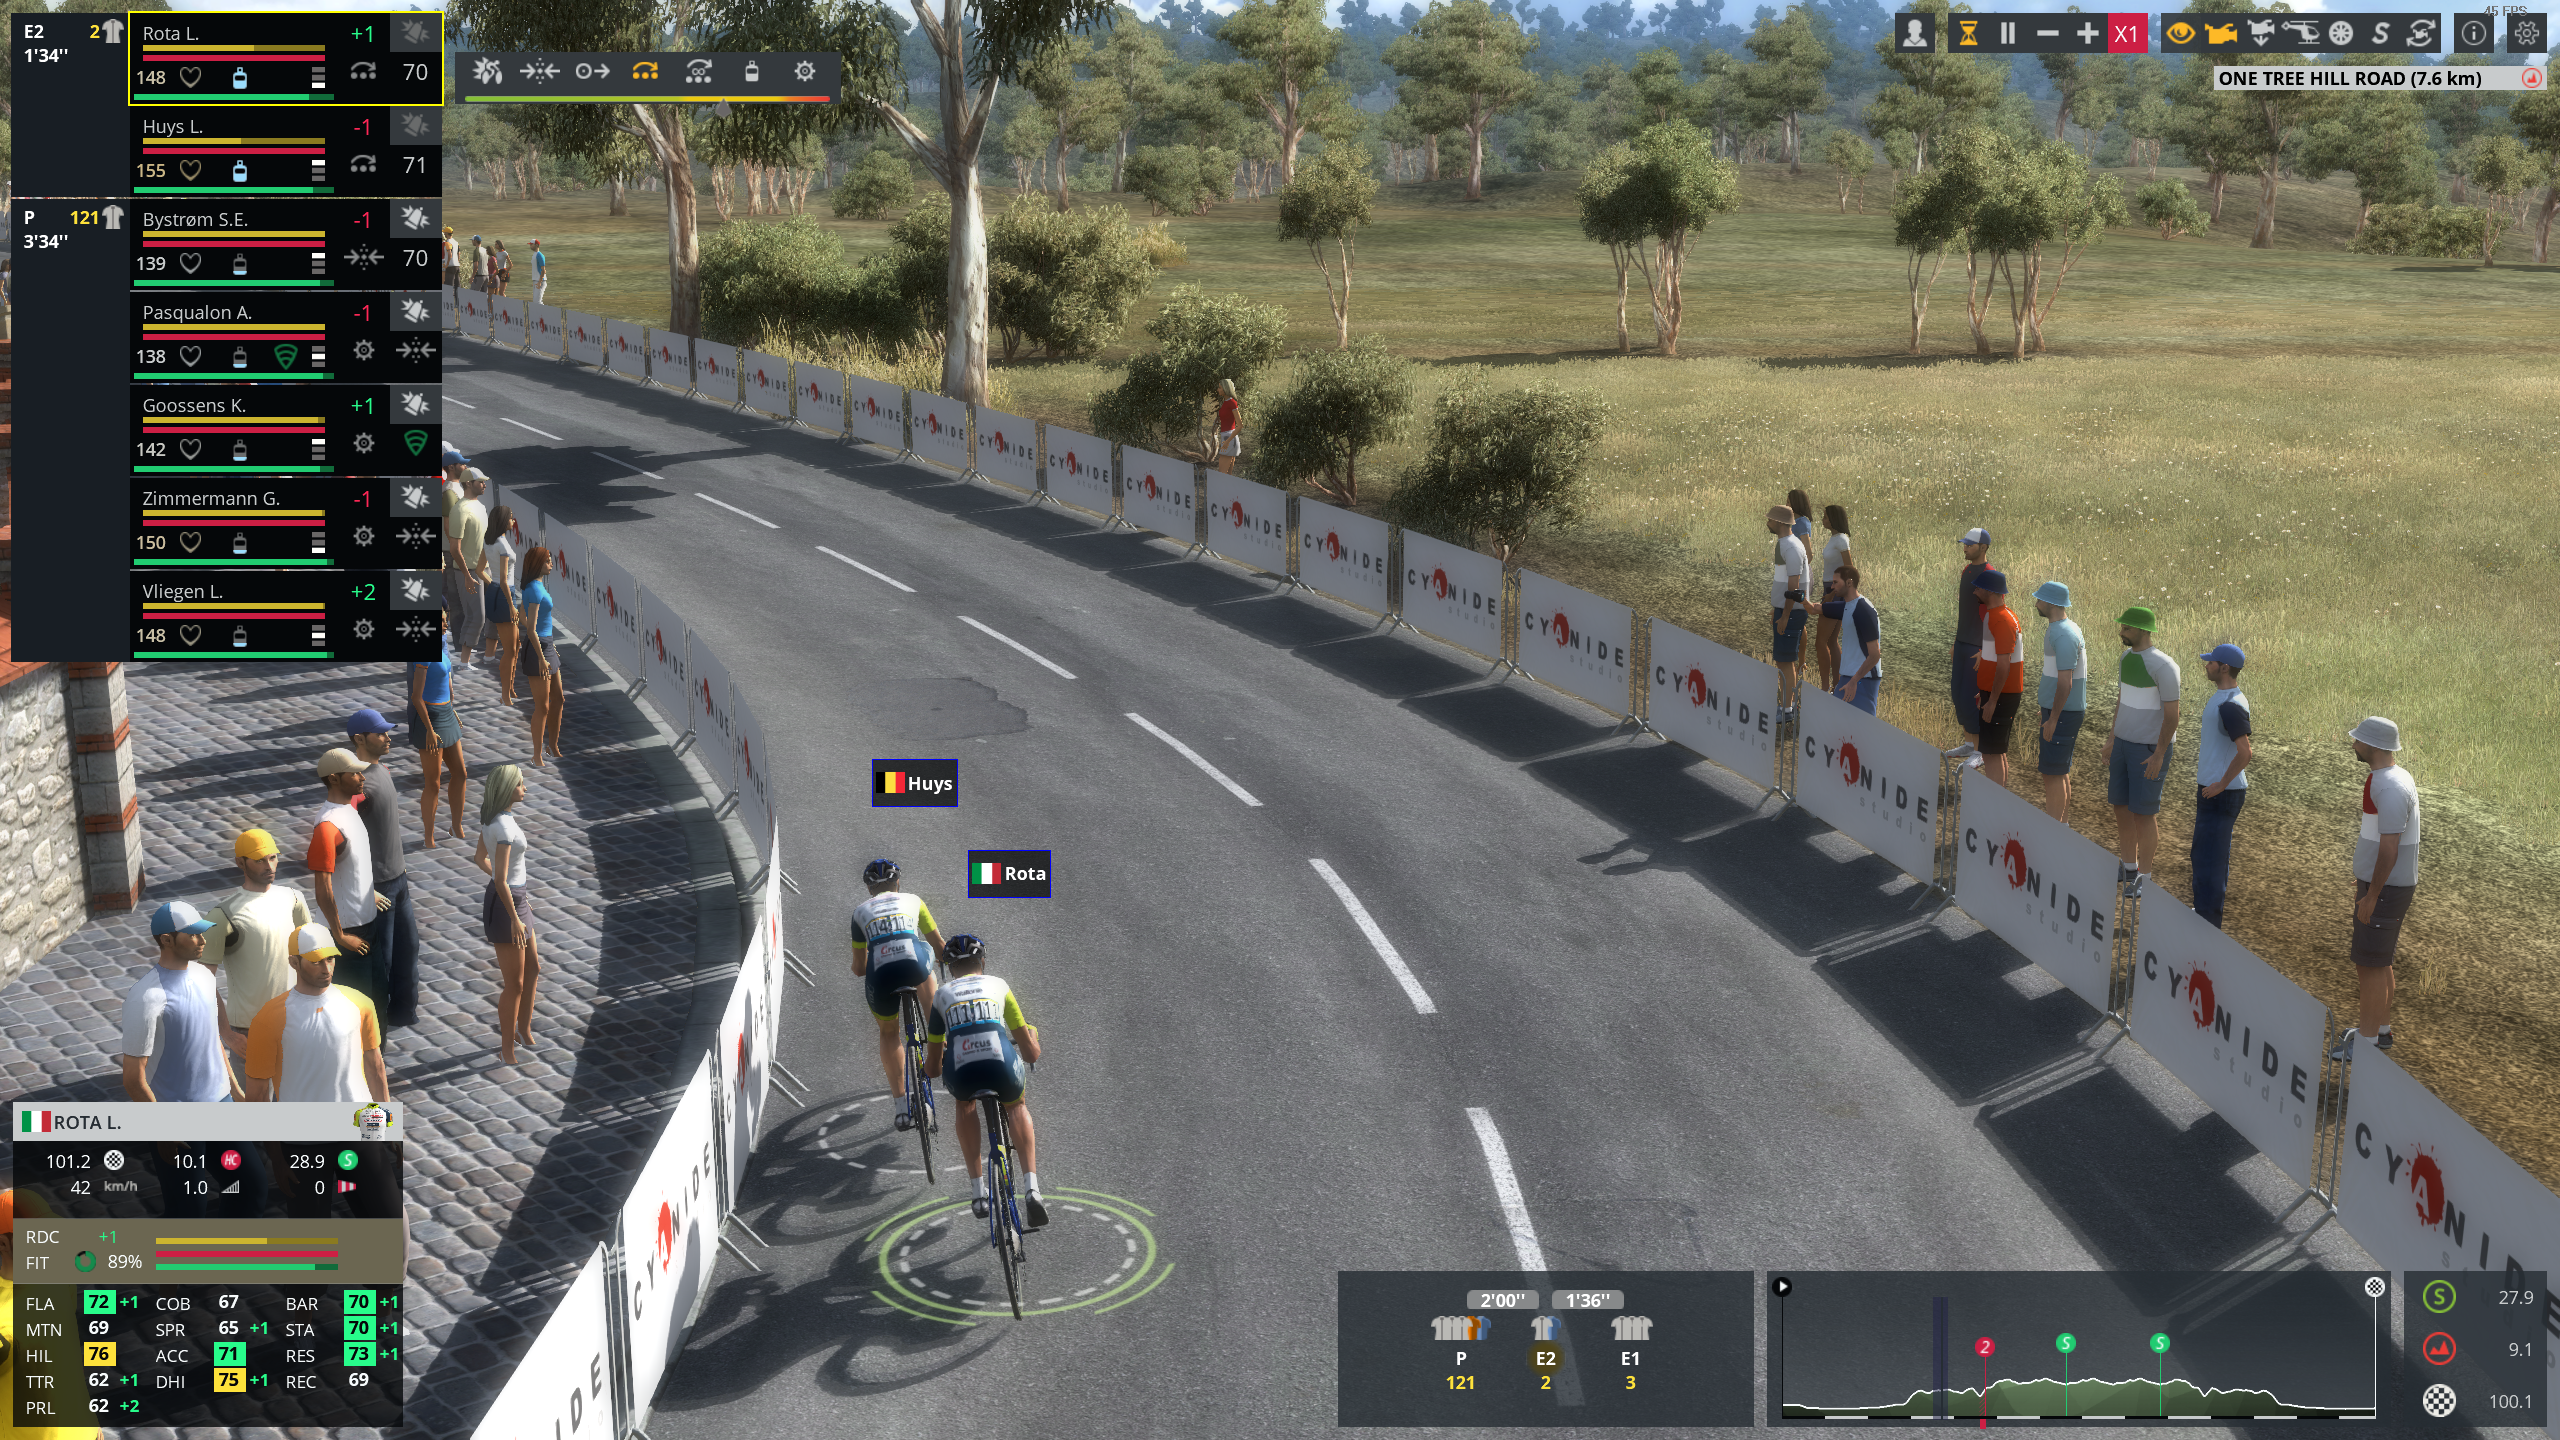 Pro Cycling Manager 2022 PC